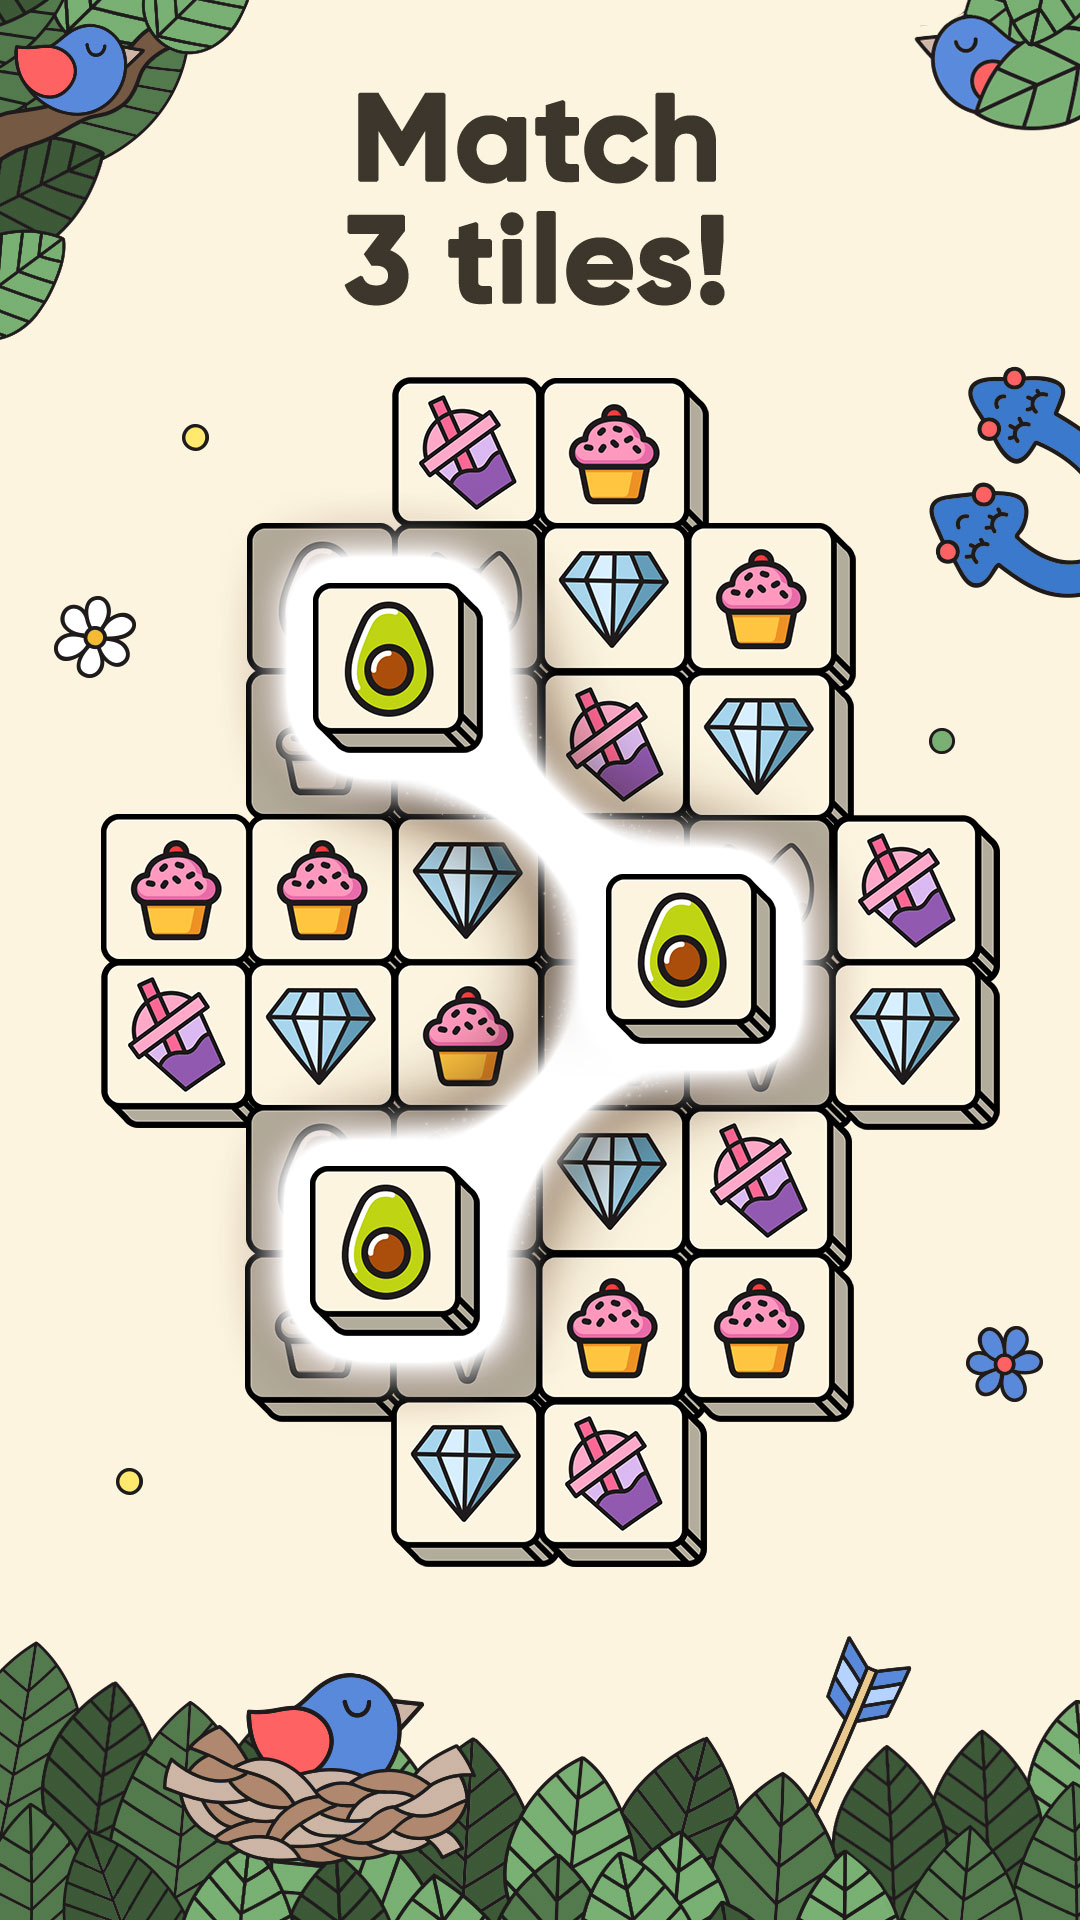 Play 3 Tiles - Tile Matching Games Online